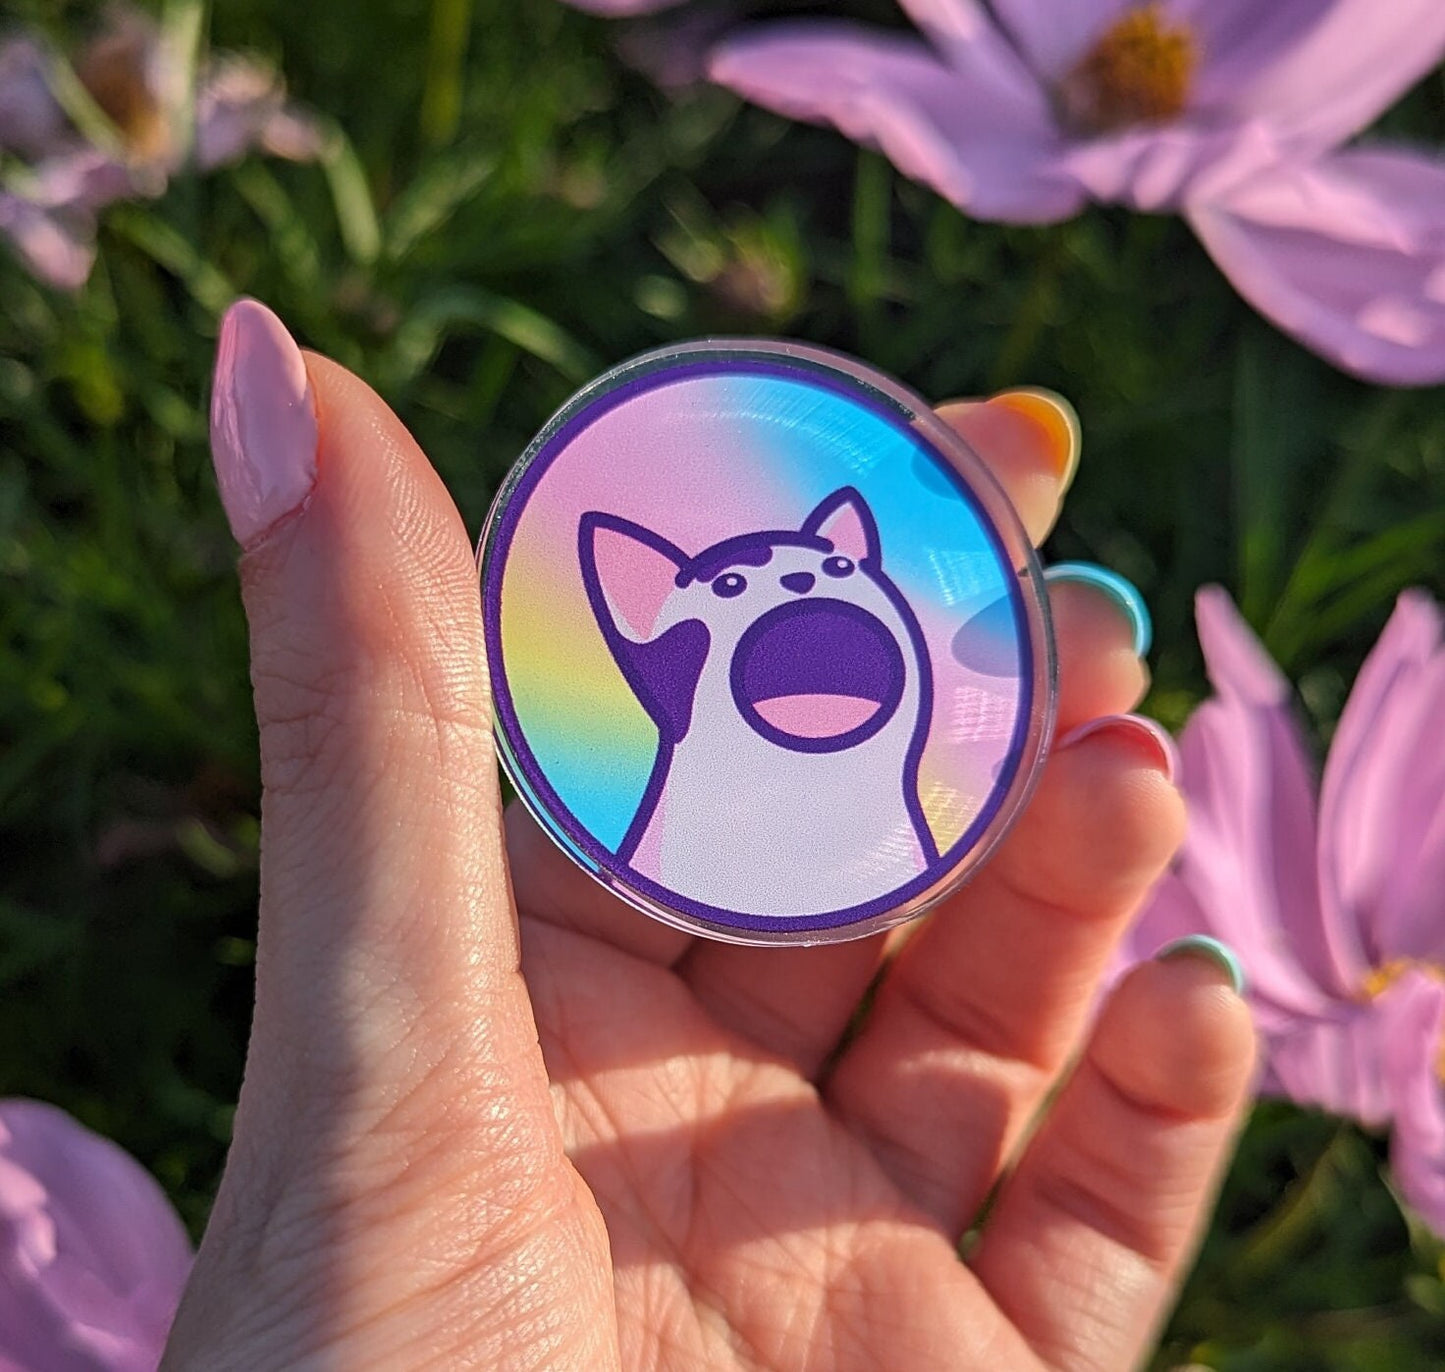 Pop Cat Meme Acrylic Pin | 40mm Acrylic Badge with Butterfly Clutch | Funny, Sustainable & Eco-Friendly Gift